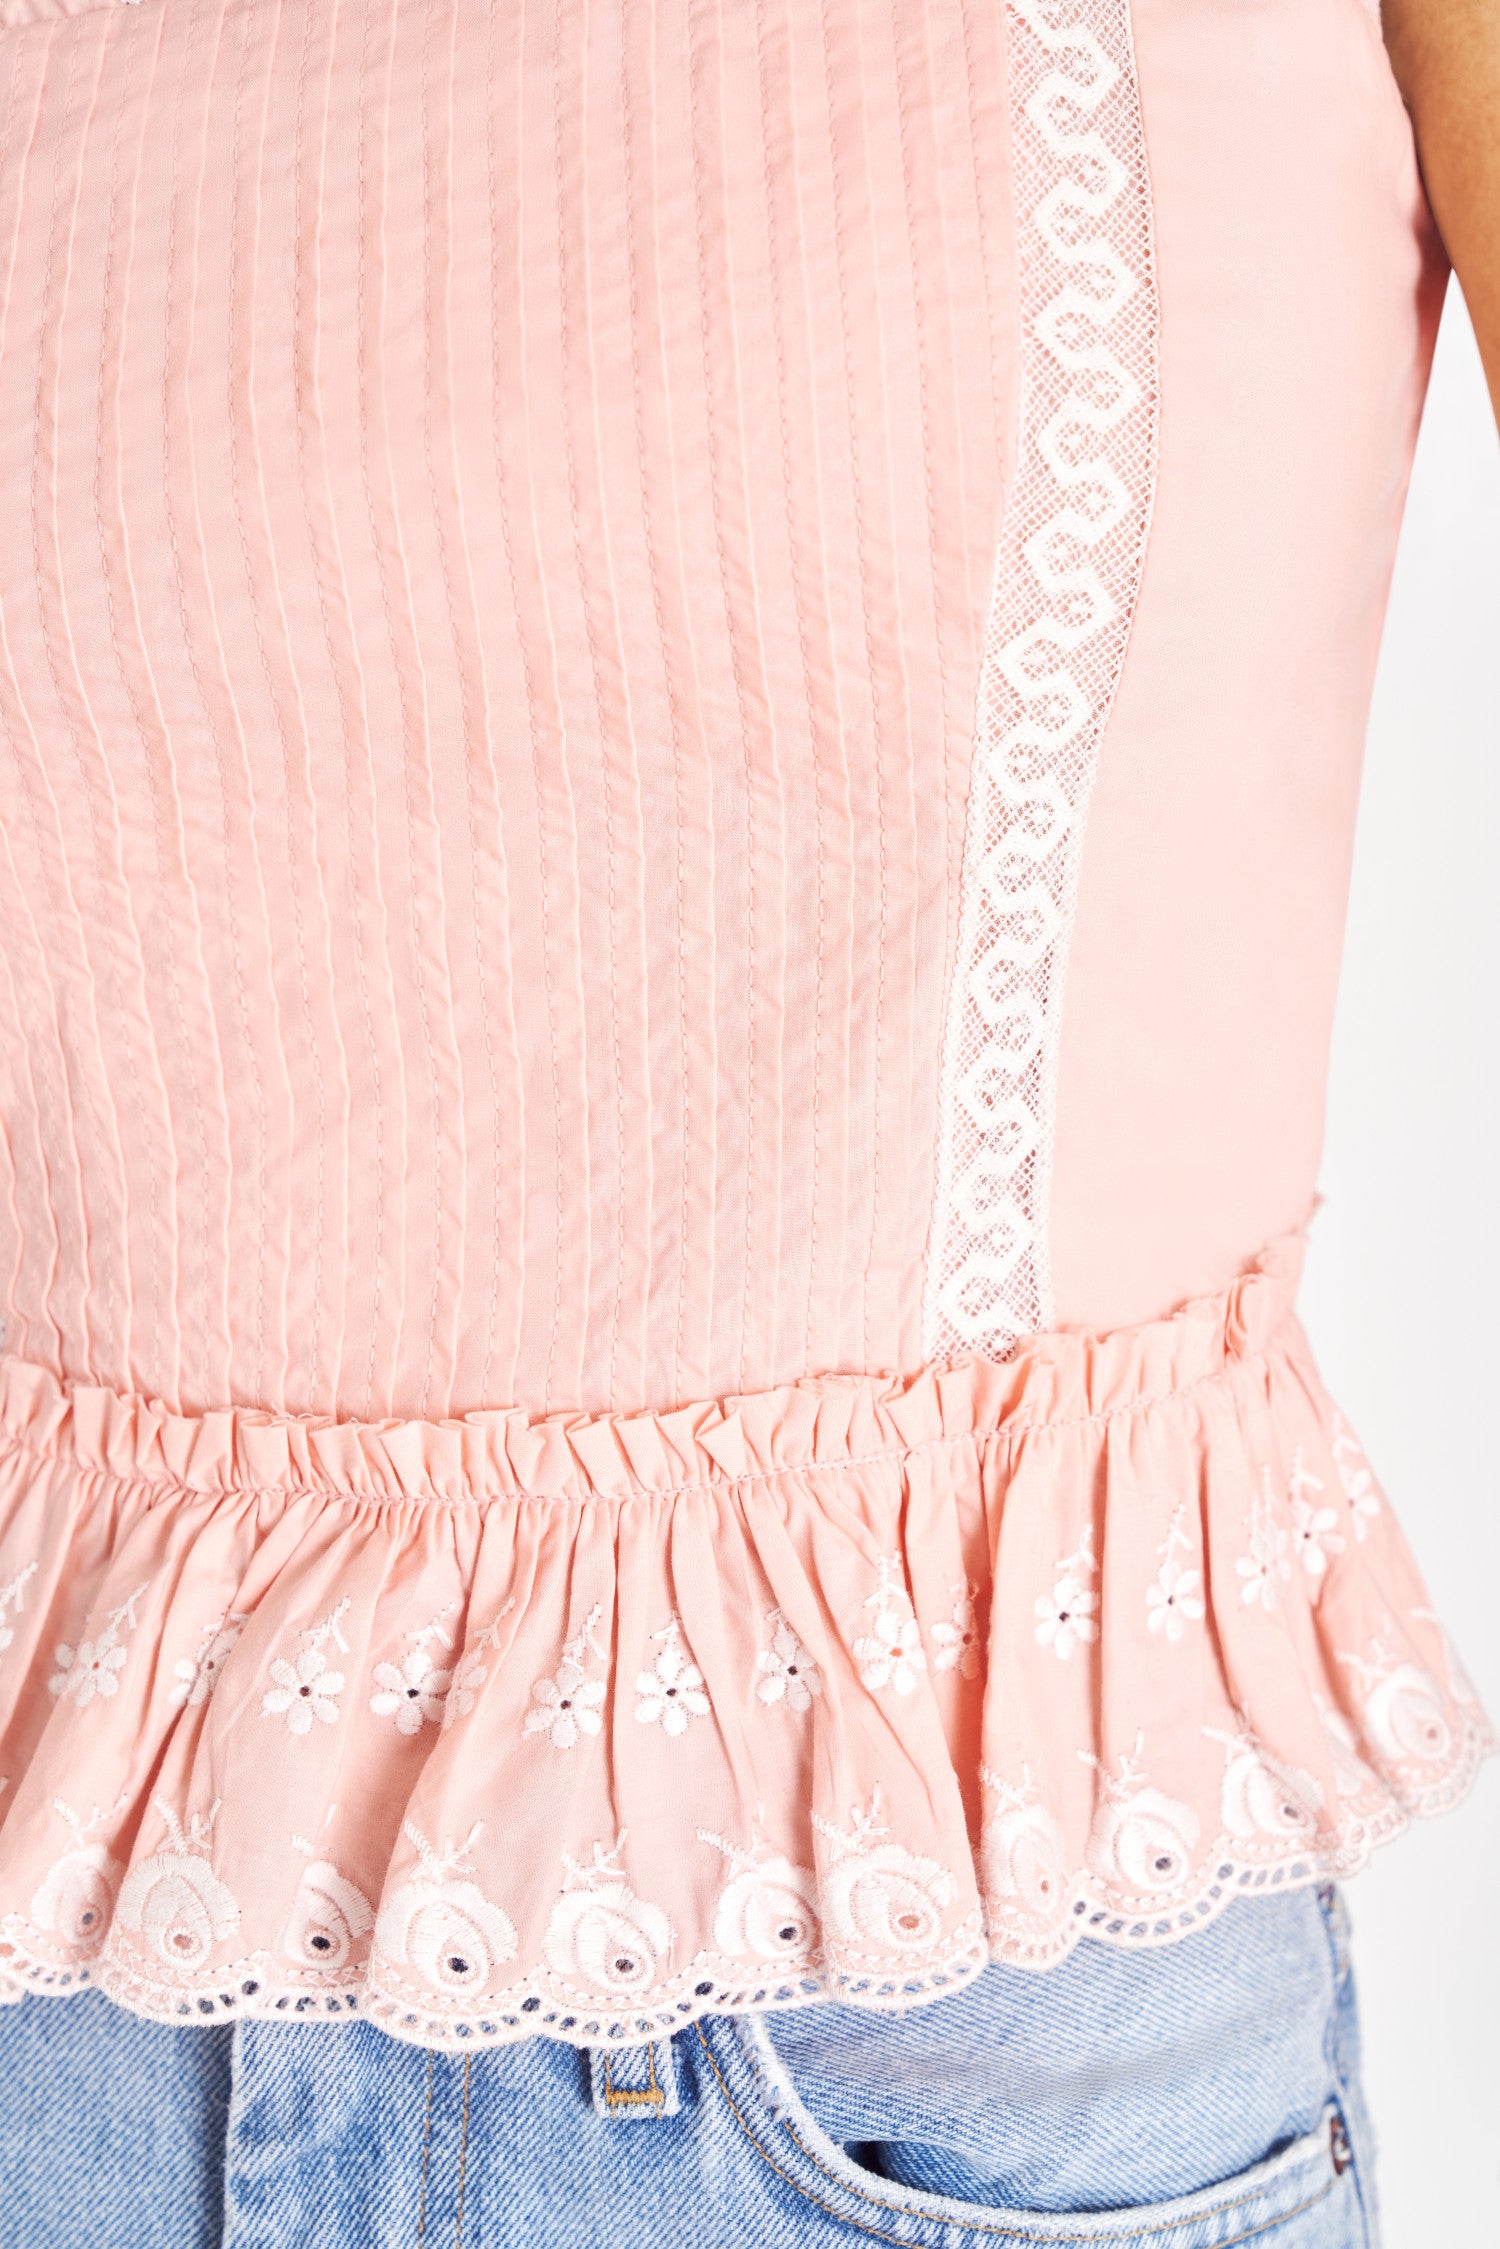 Pink cotton bustier with lace eyelet detail.